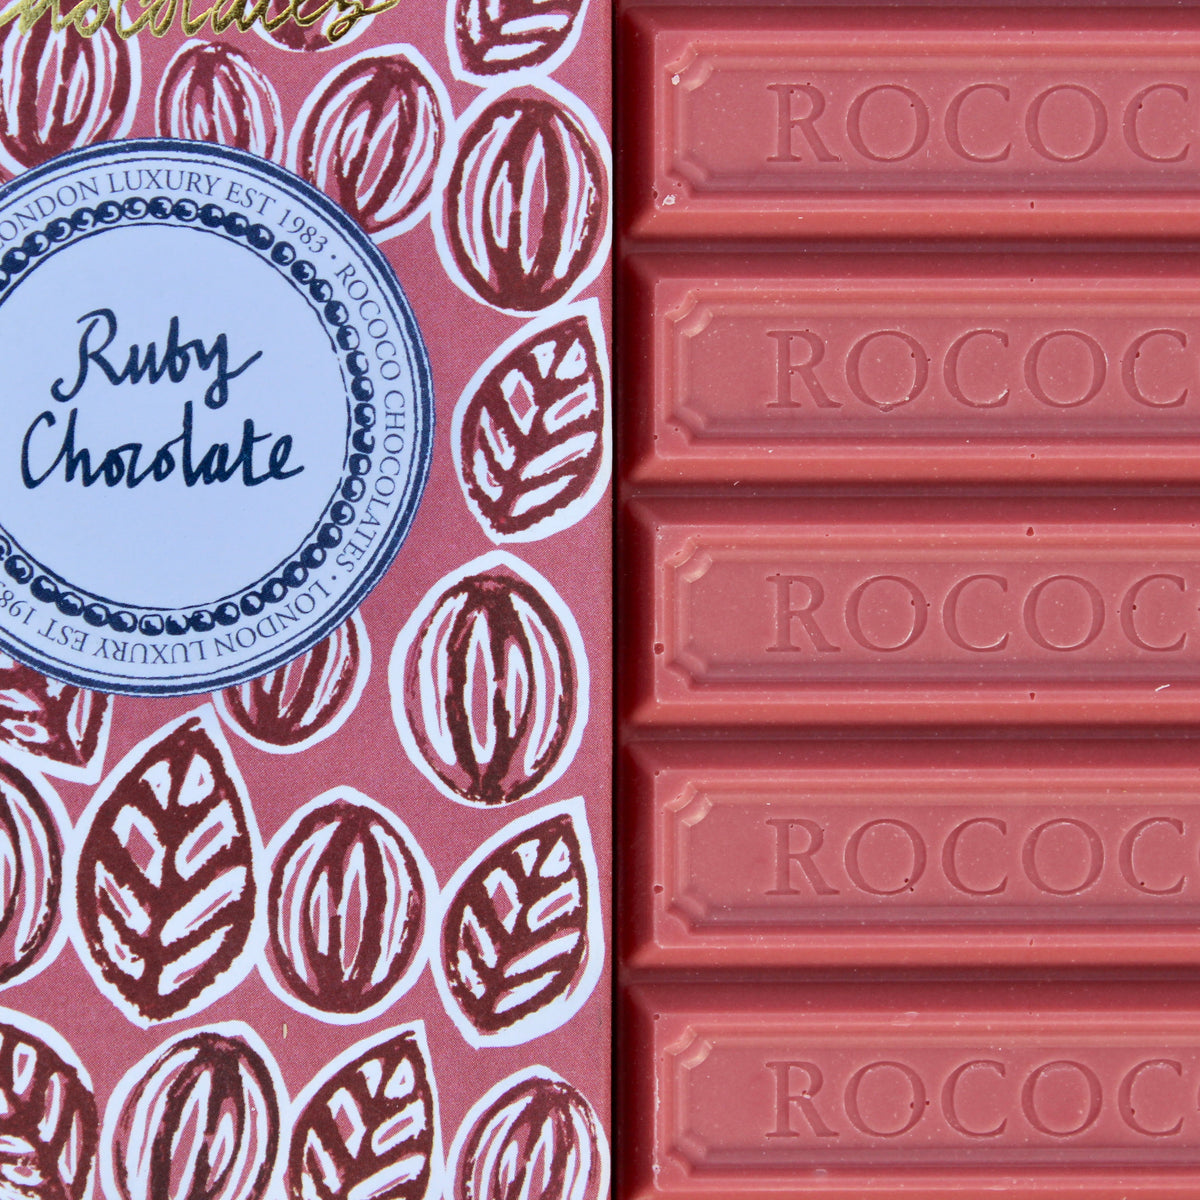 Ruby Chocolate: What It Is, and Where You Can Buy It